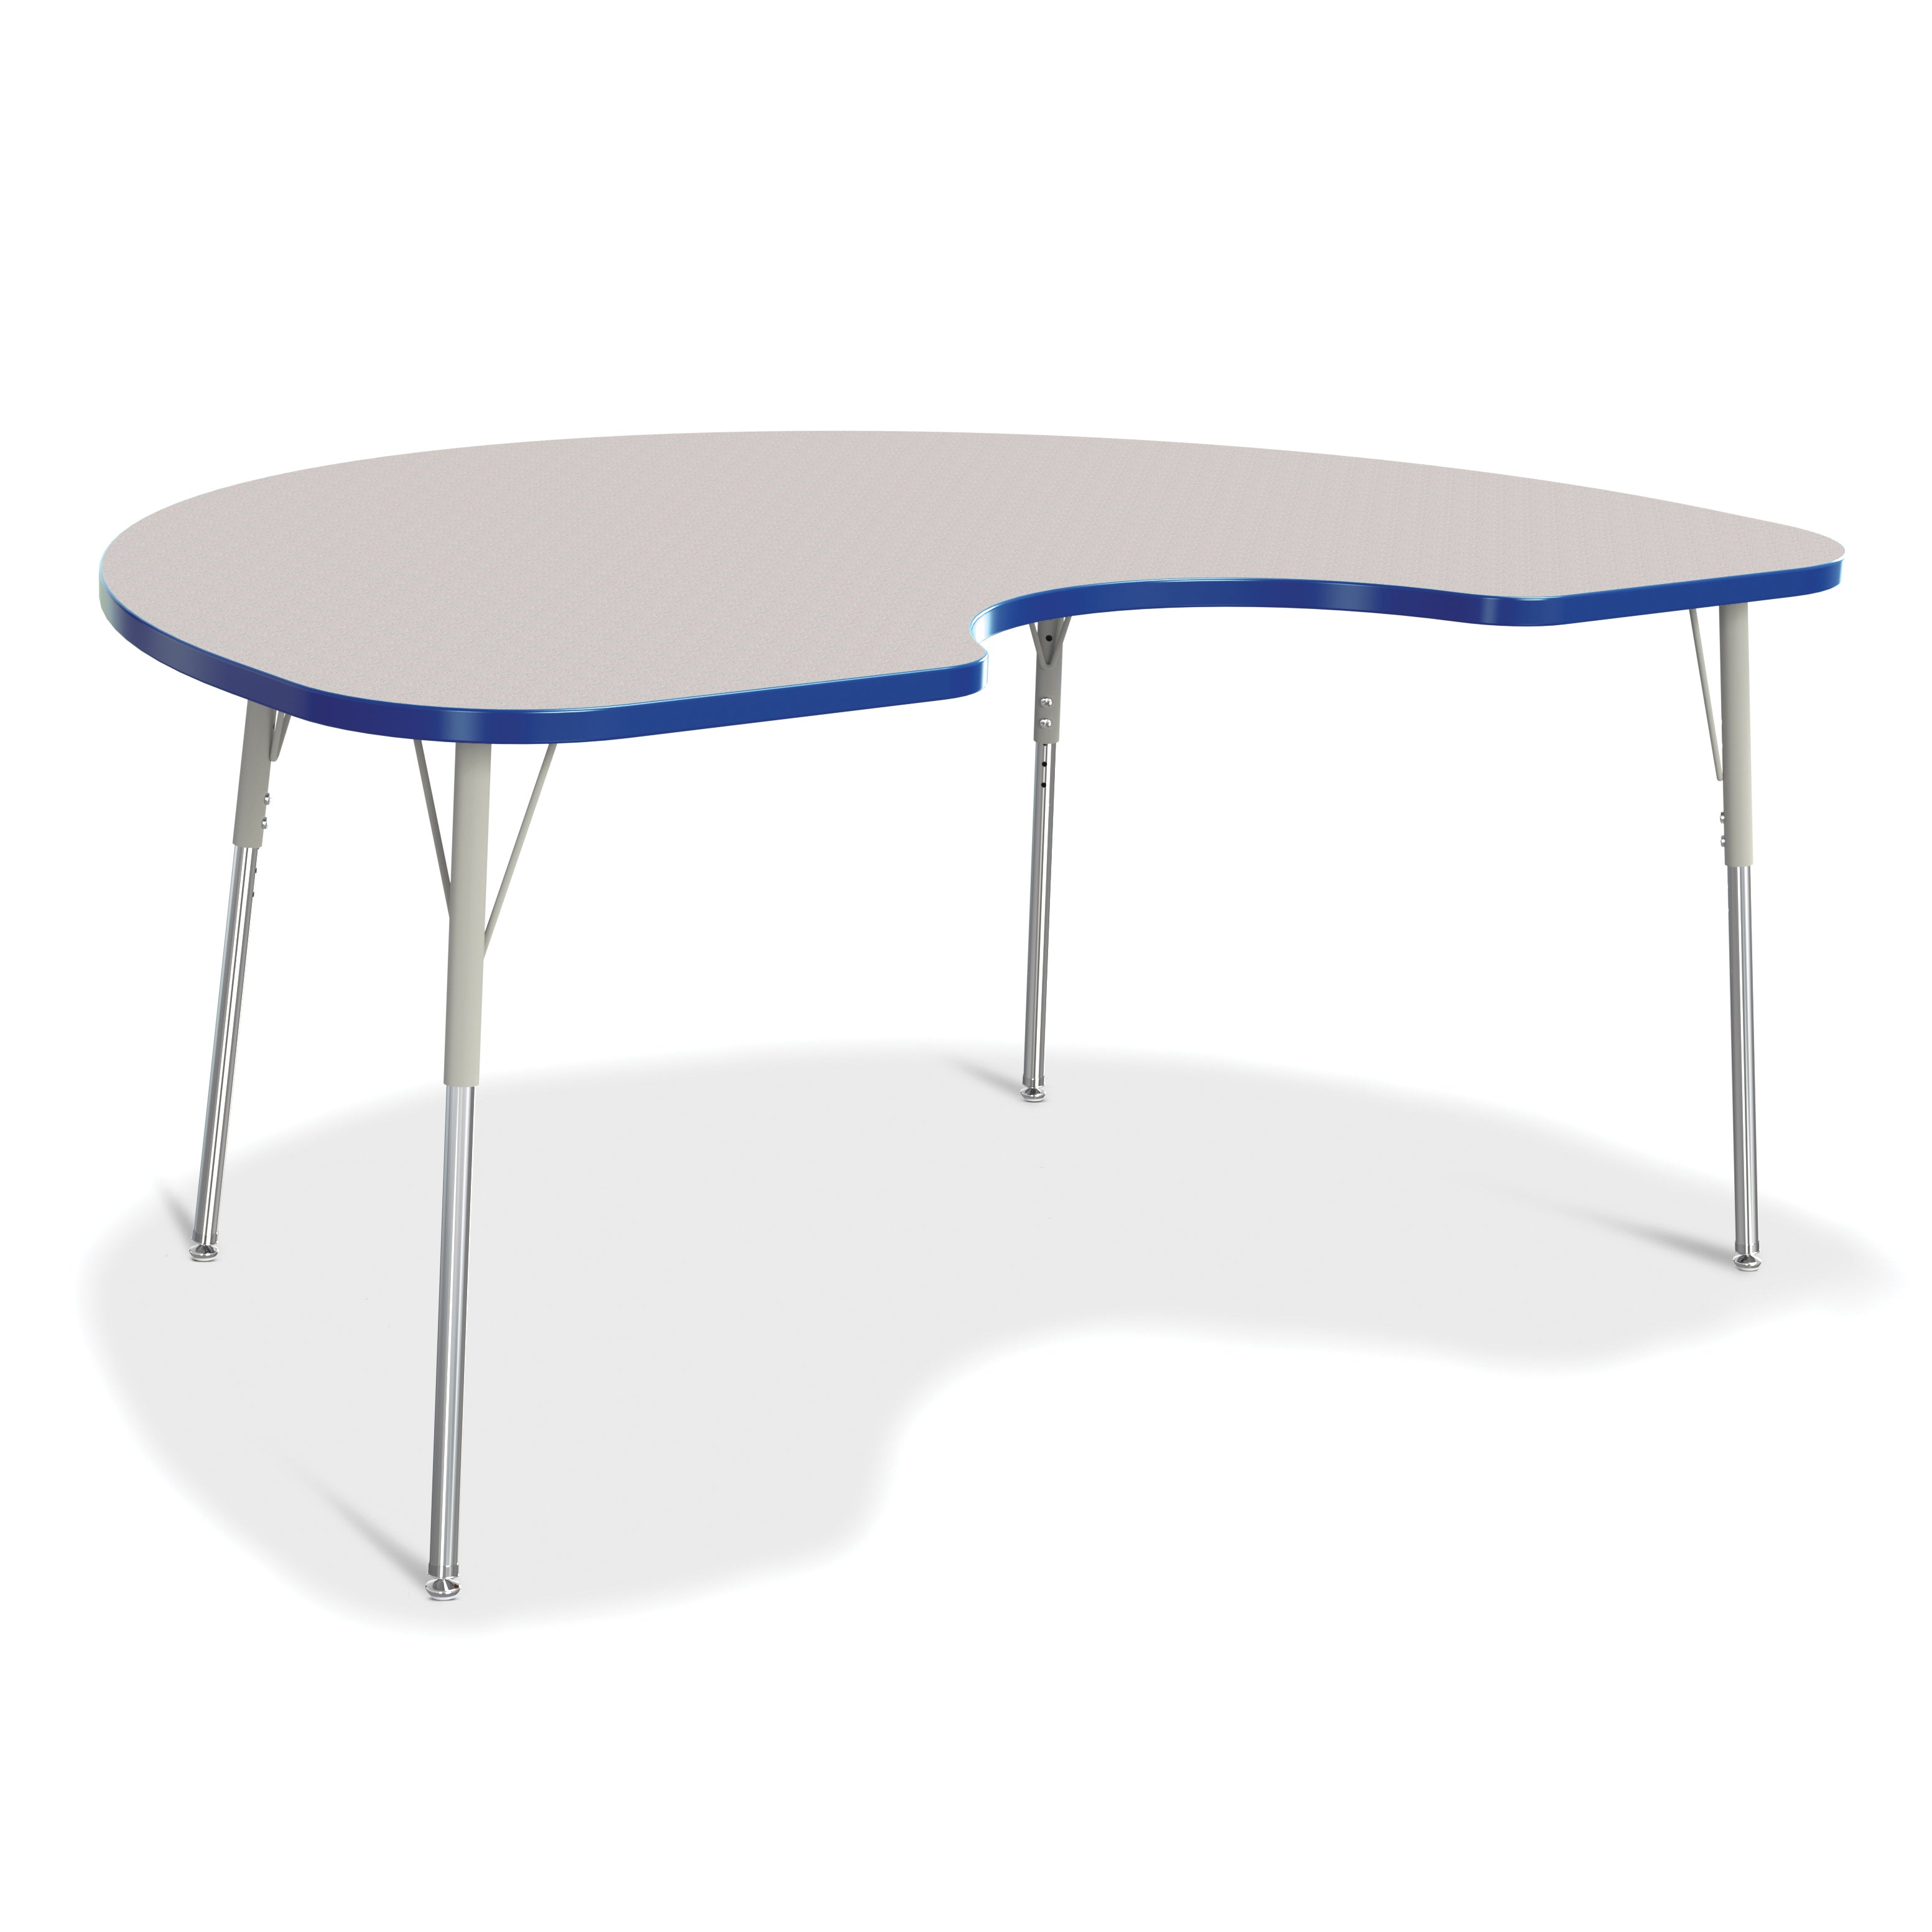 6423JCA003, Berries Kidney Activity Table - 48" X 72", A-height - Freckled Gray/Blue/Gray